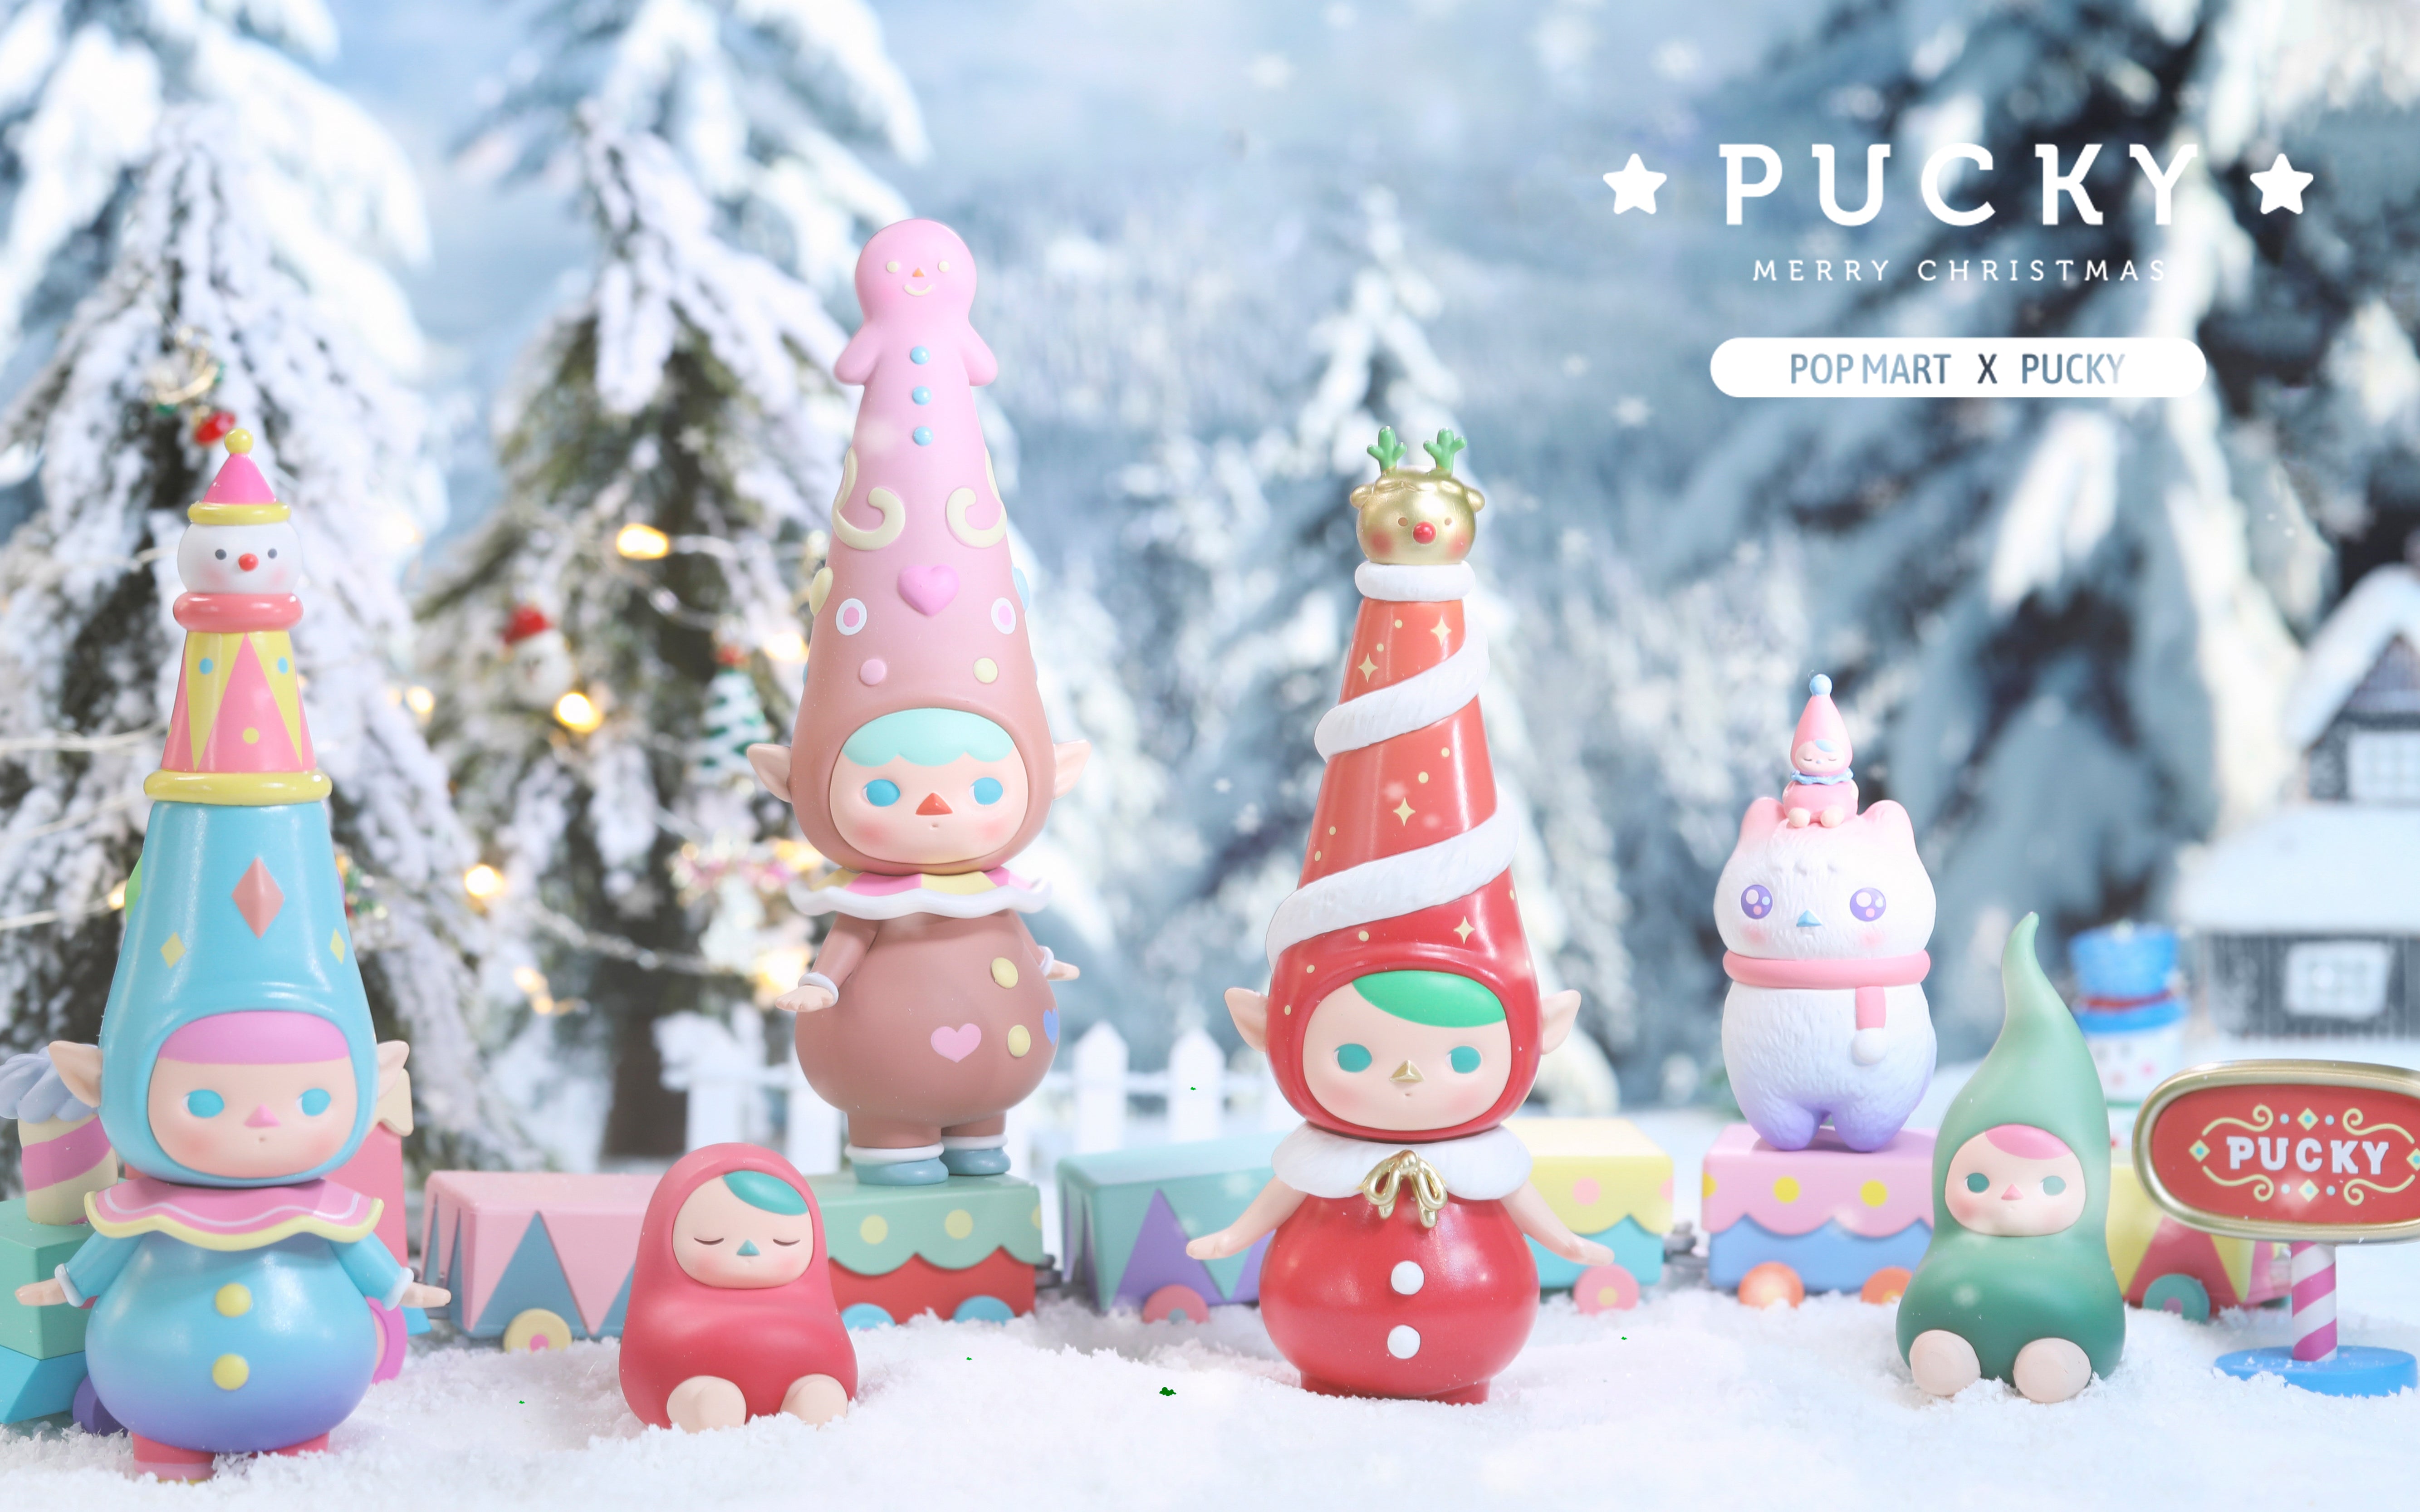 Pucky Merry Christmas Set by Pucky